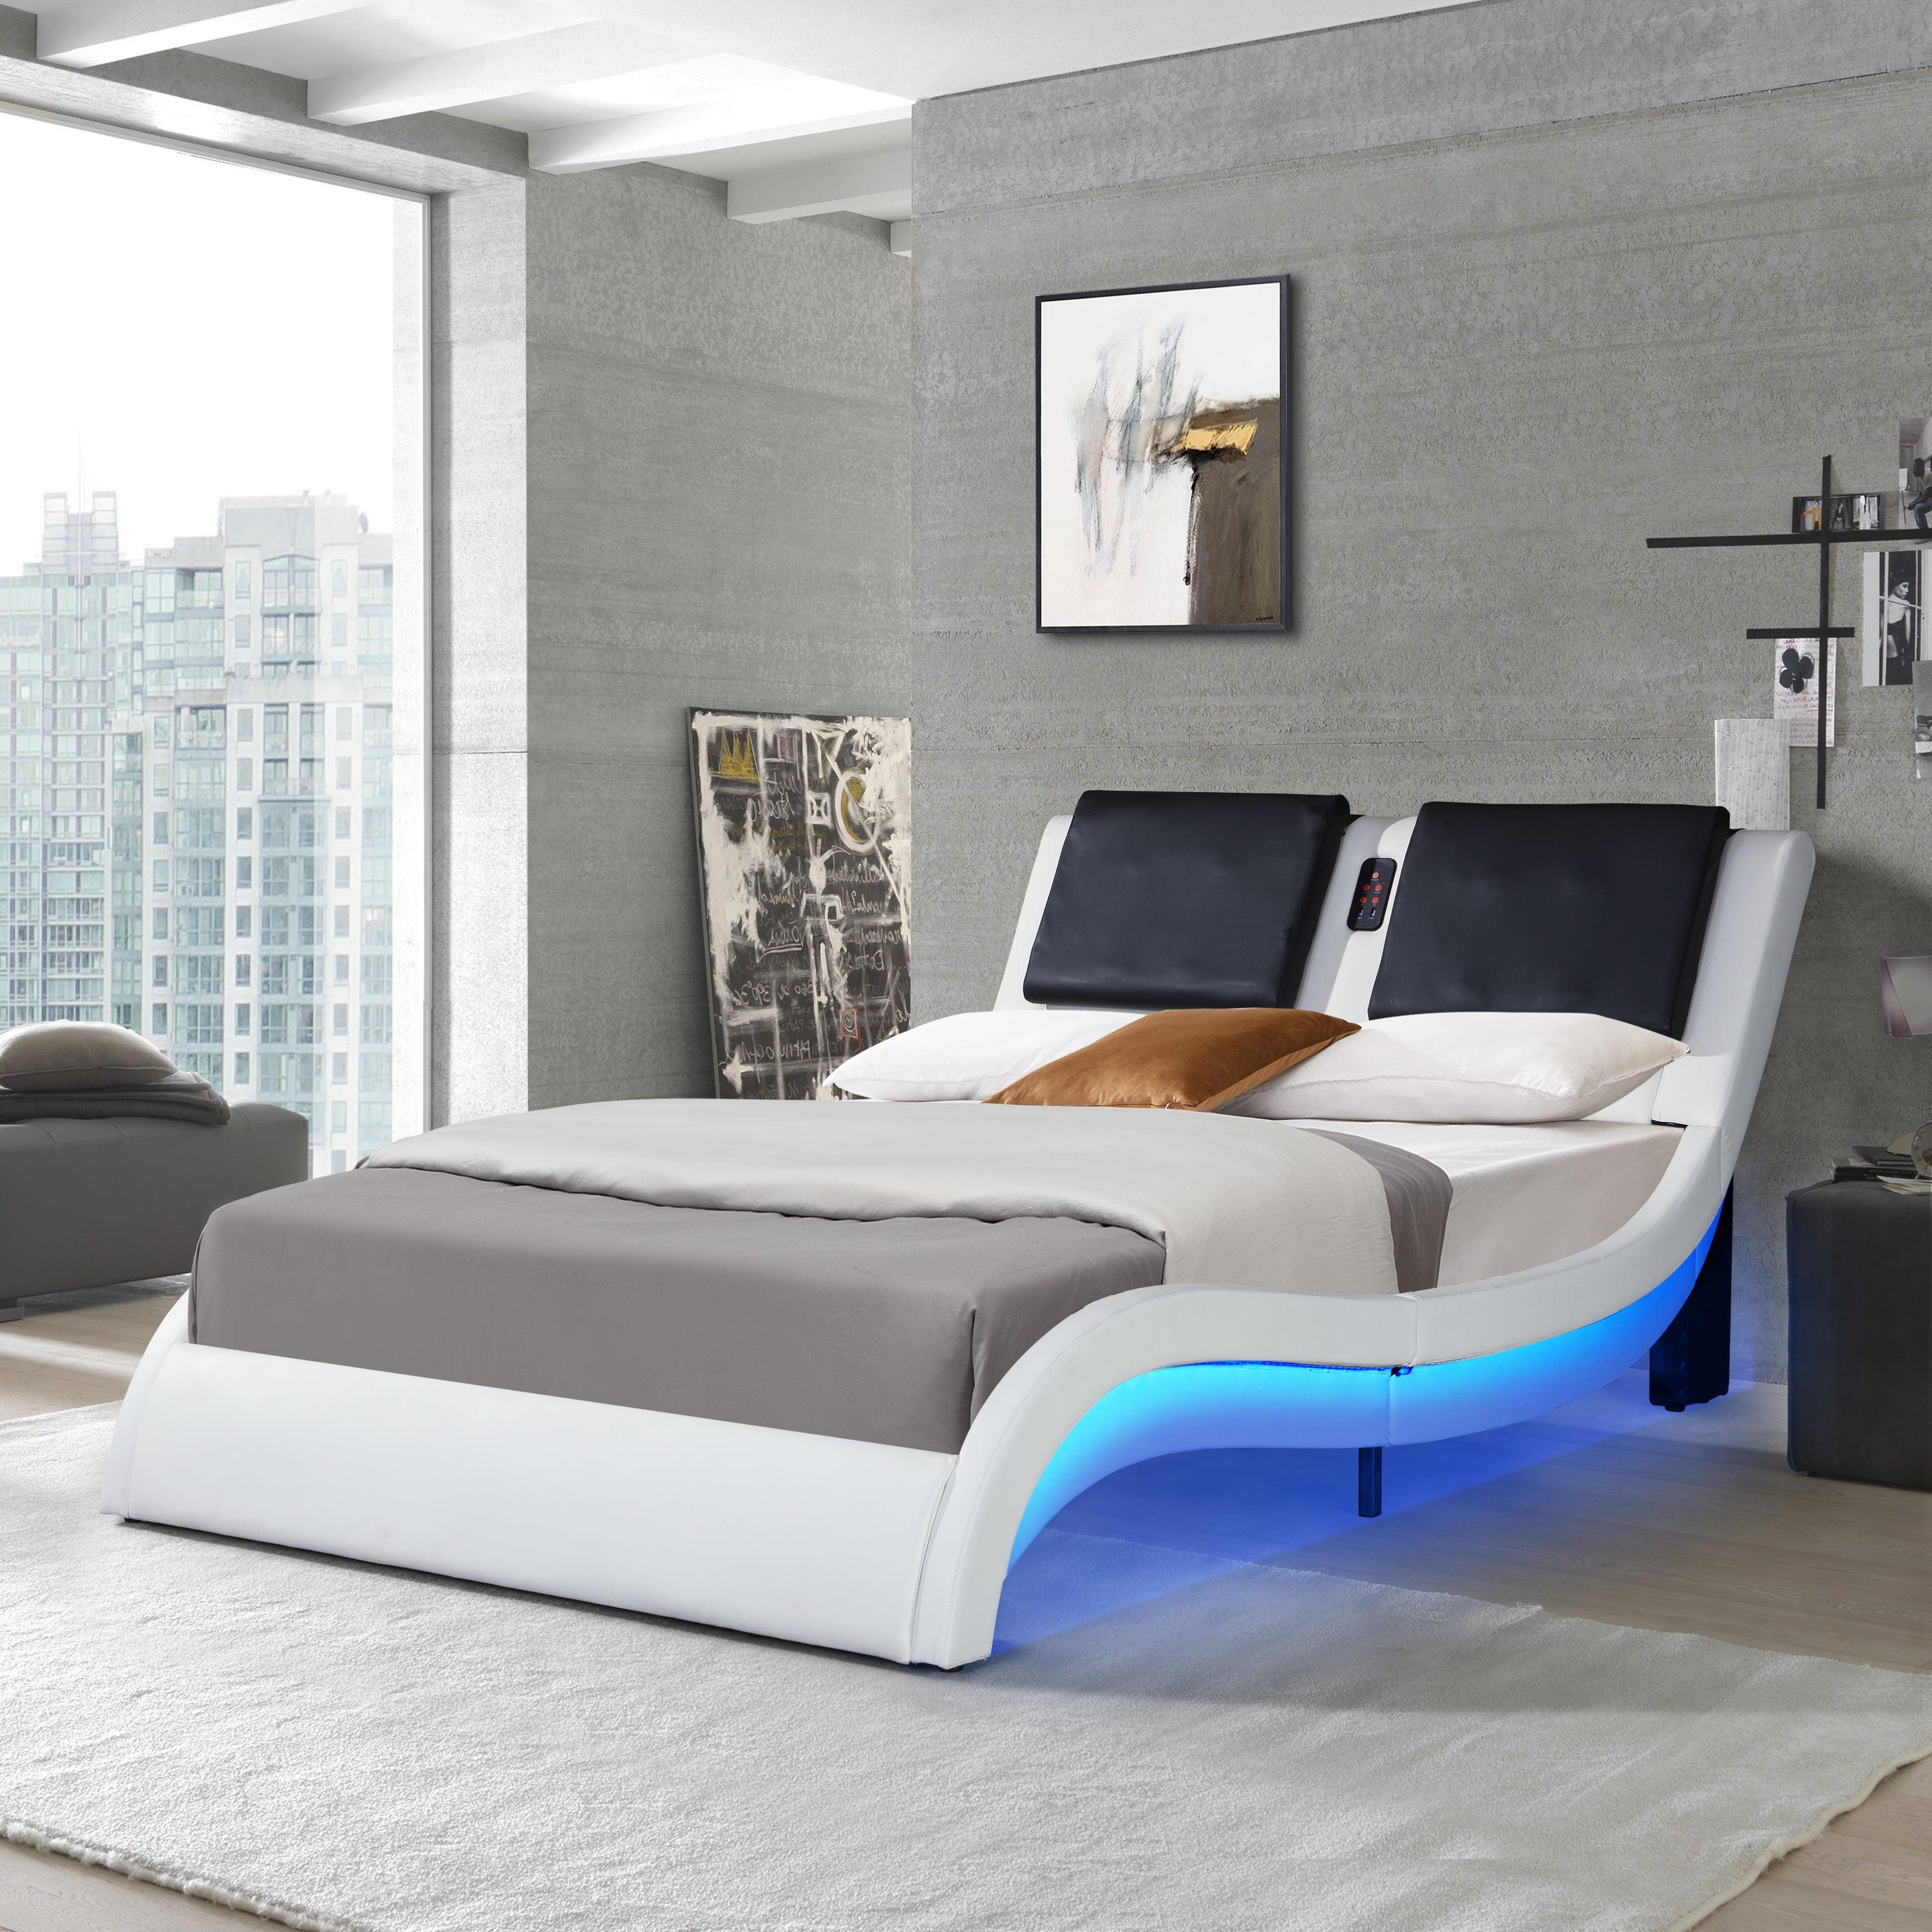 🆓🚛 Faux Leather Upholstered Platform Bed Frame With Led Lighting, Bluetooth Connection To Play Music Control, Backrest Vibration Massage, Curve Design, Wood Slat Support, Queen, White